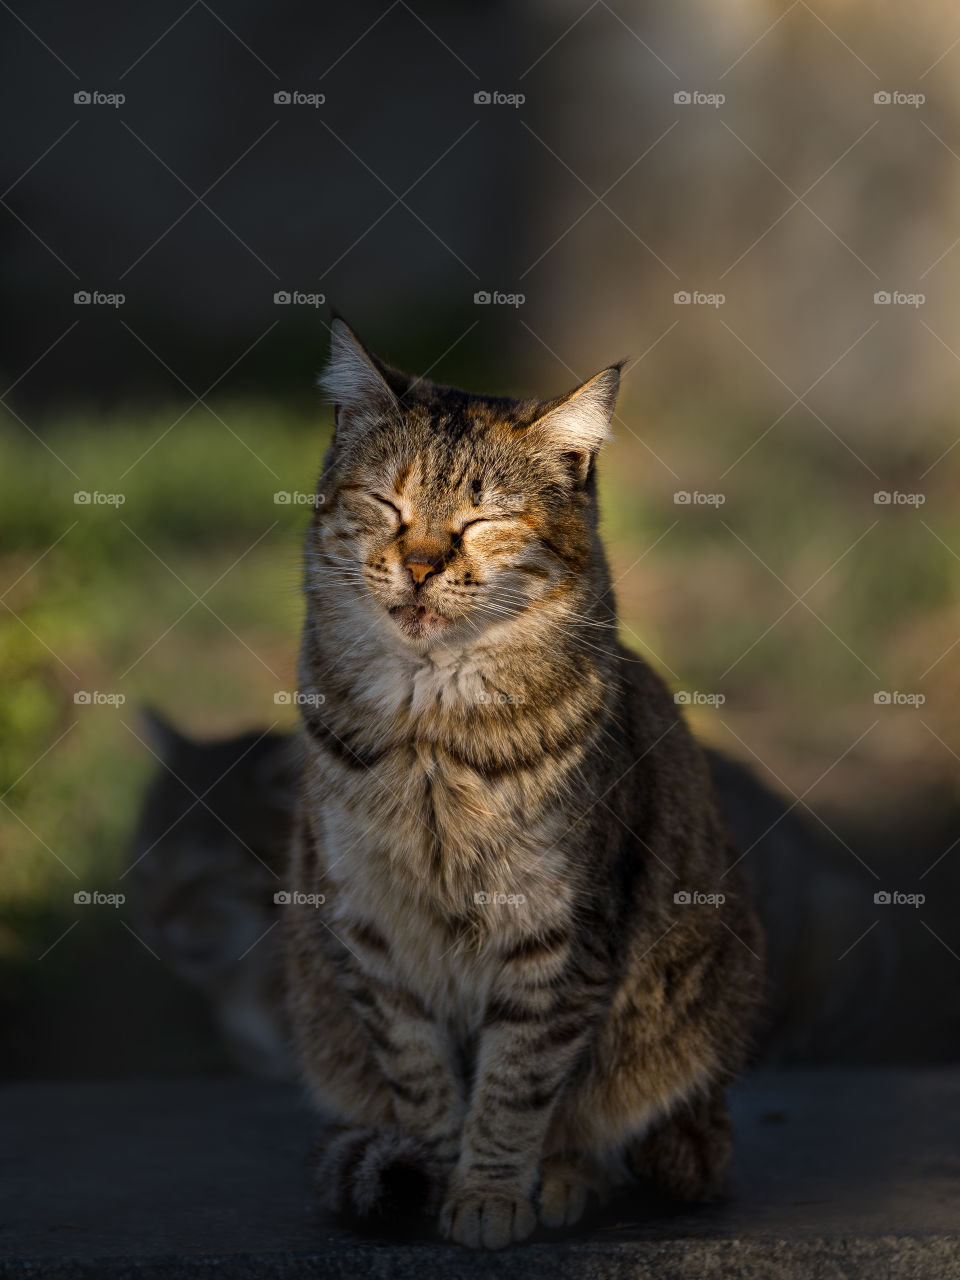 A street cat with a contented face, sitting outside and basking in the sun, on a warm spring evening